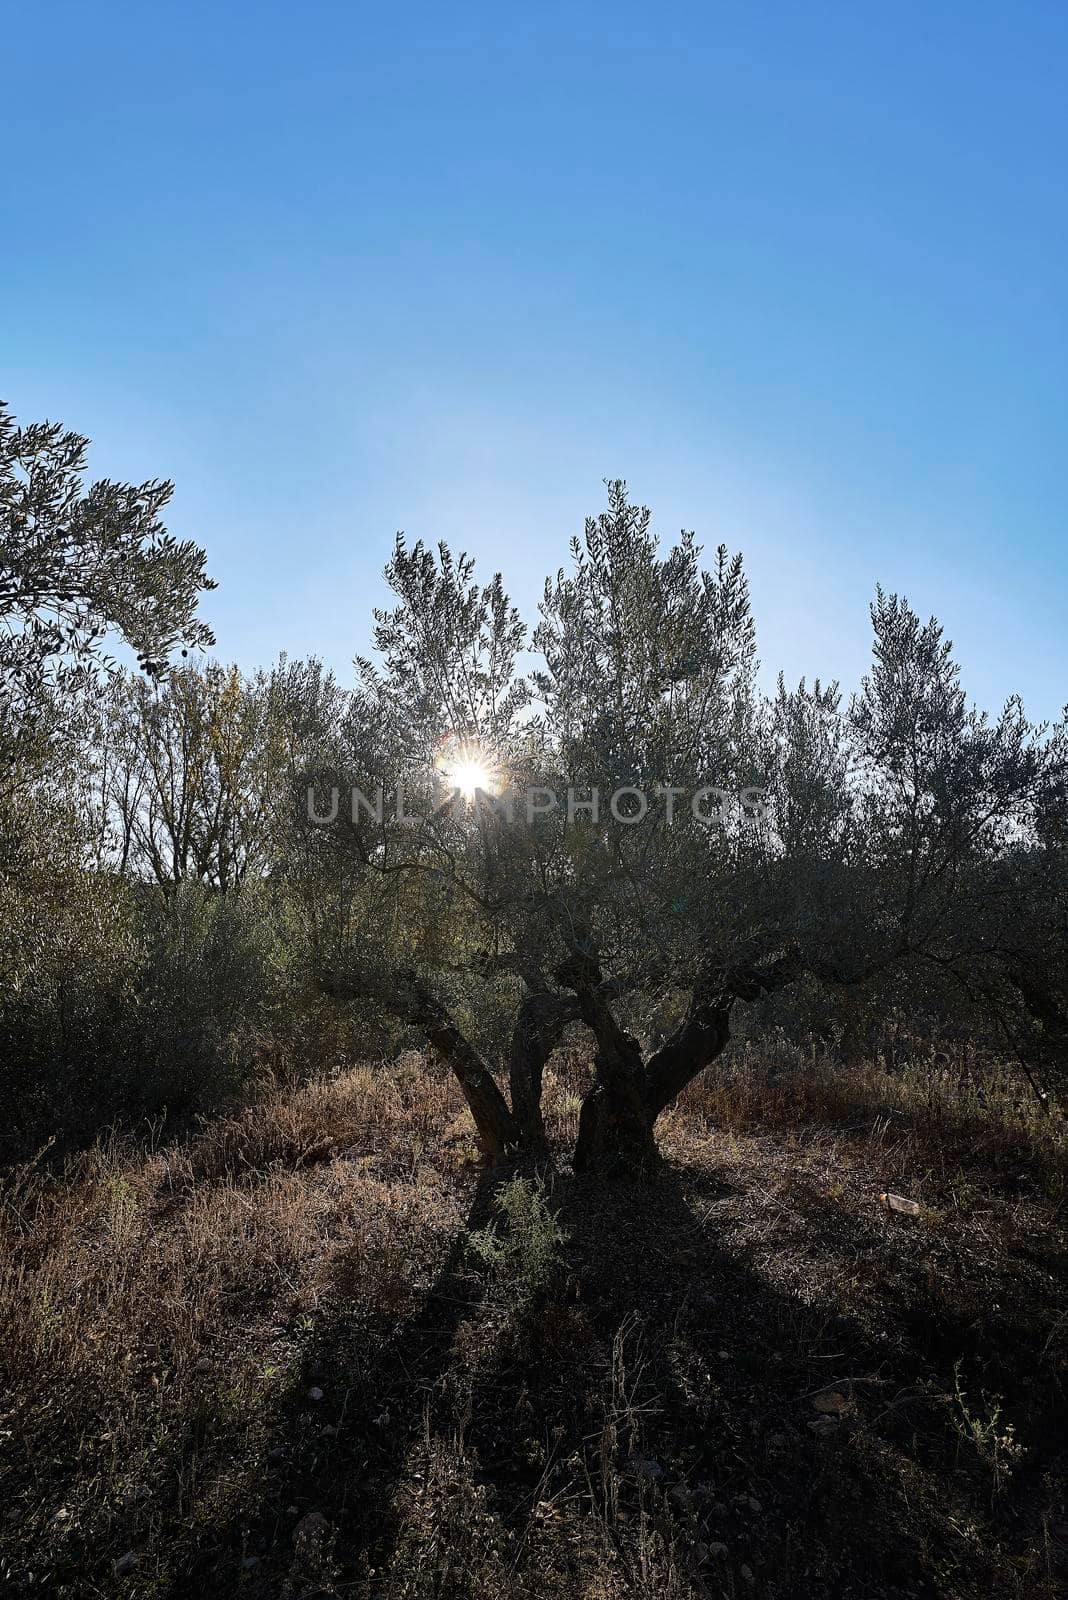 Sunbeams appearing among centenary olive trees. Blue sky, silhouette, backlight. sun star